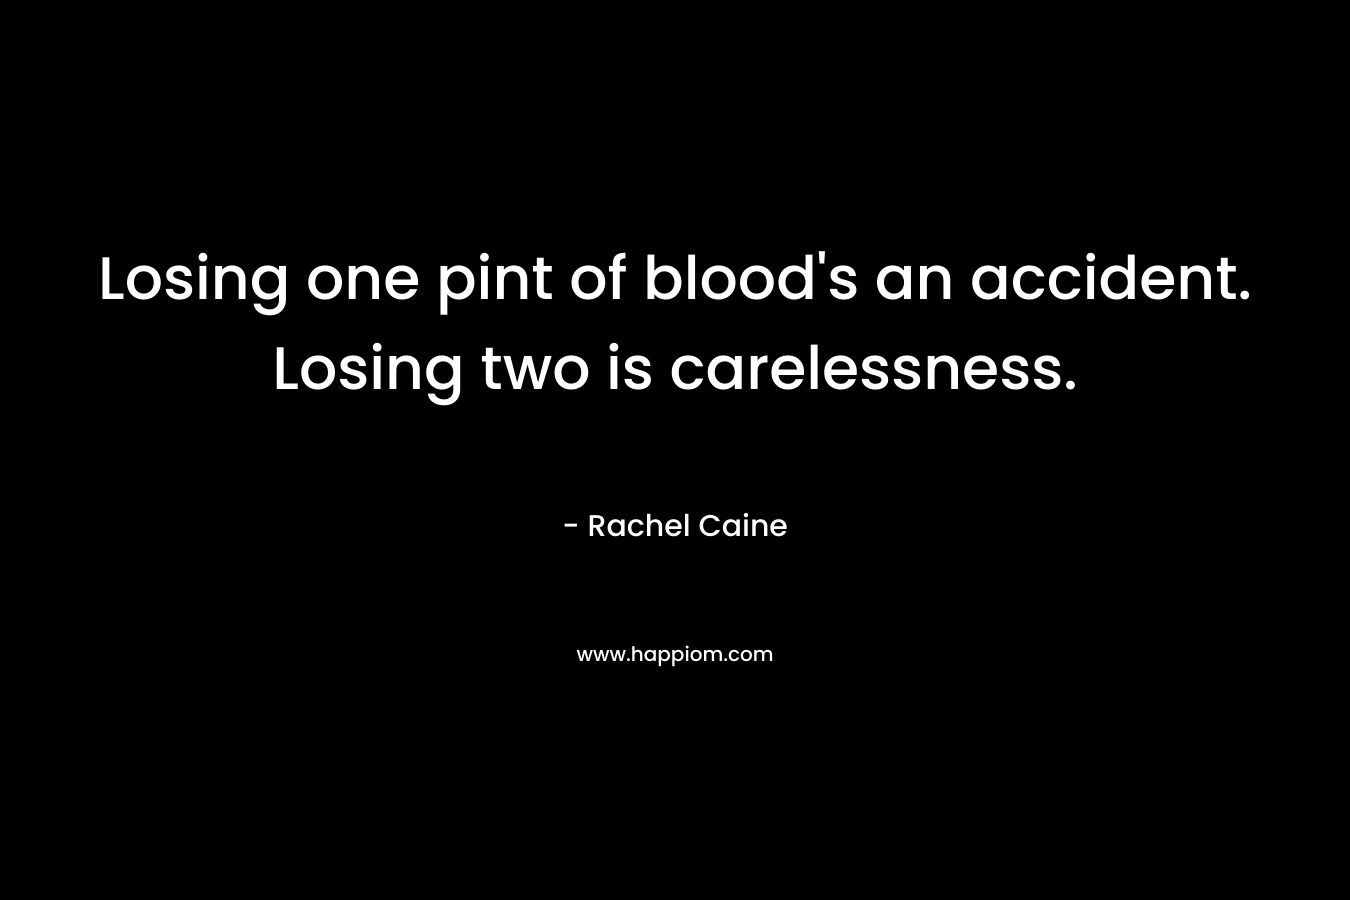 Losing one pint of blood’s an accident. Losing two is carelessness. – Rachel Caine